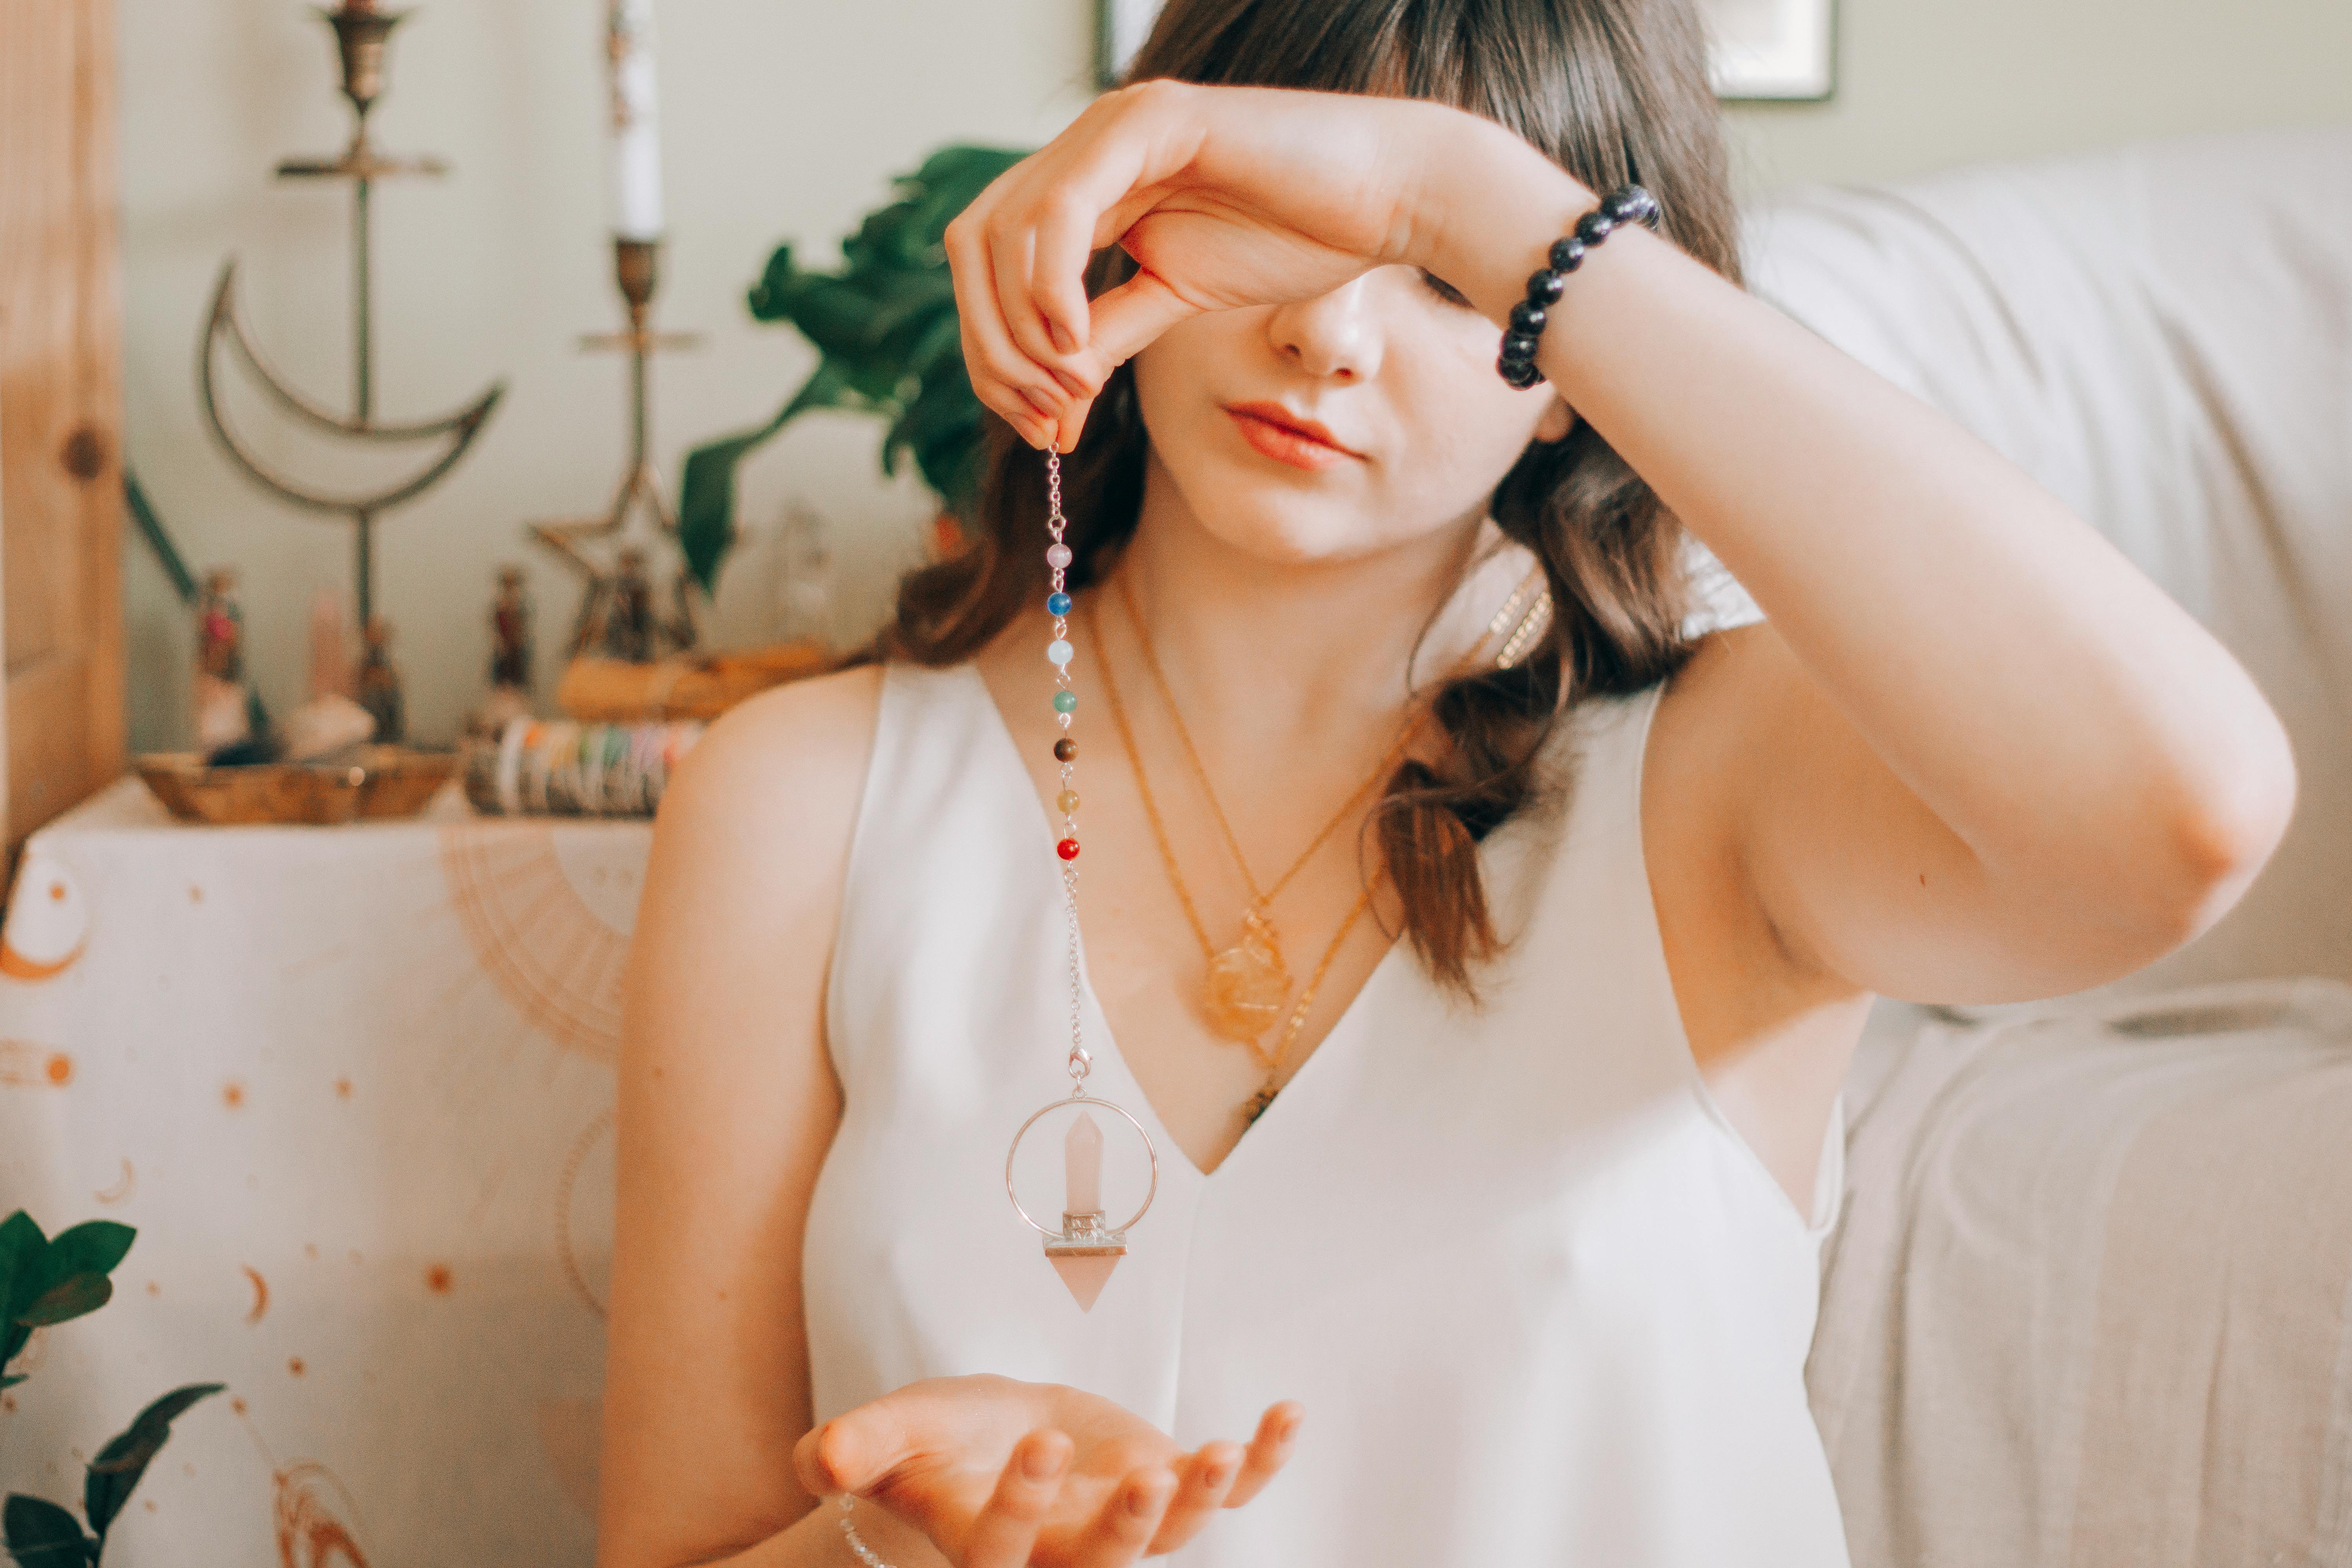 A woman holding a pendulum over her palm | Source: Pexels